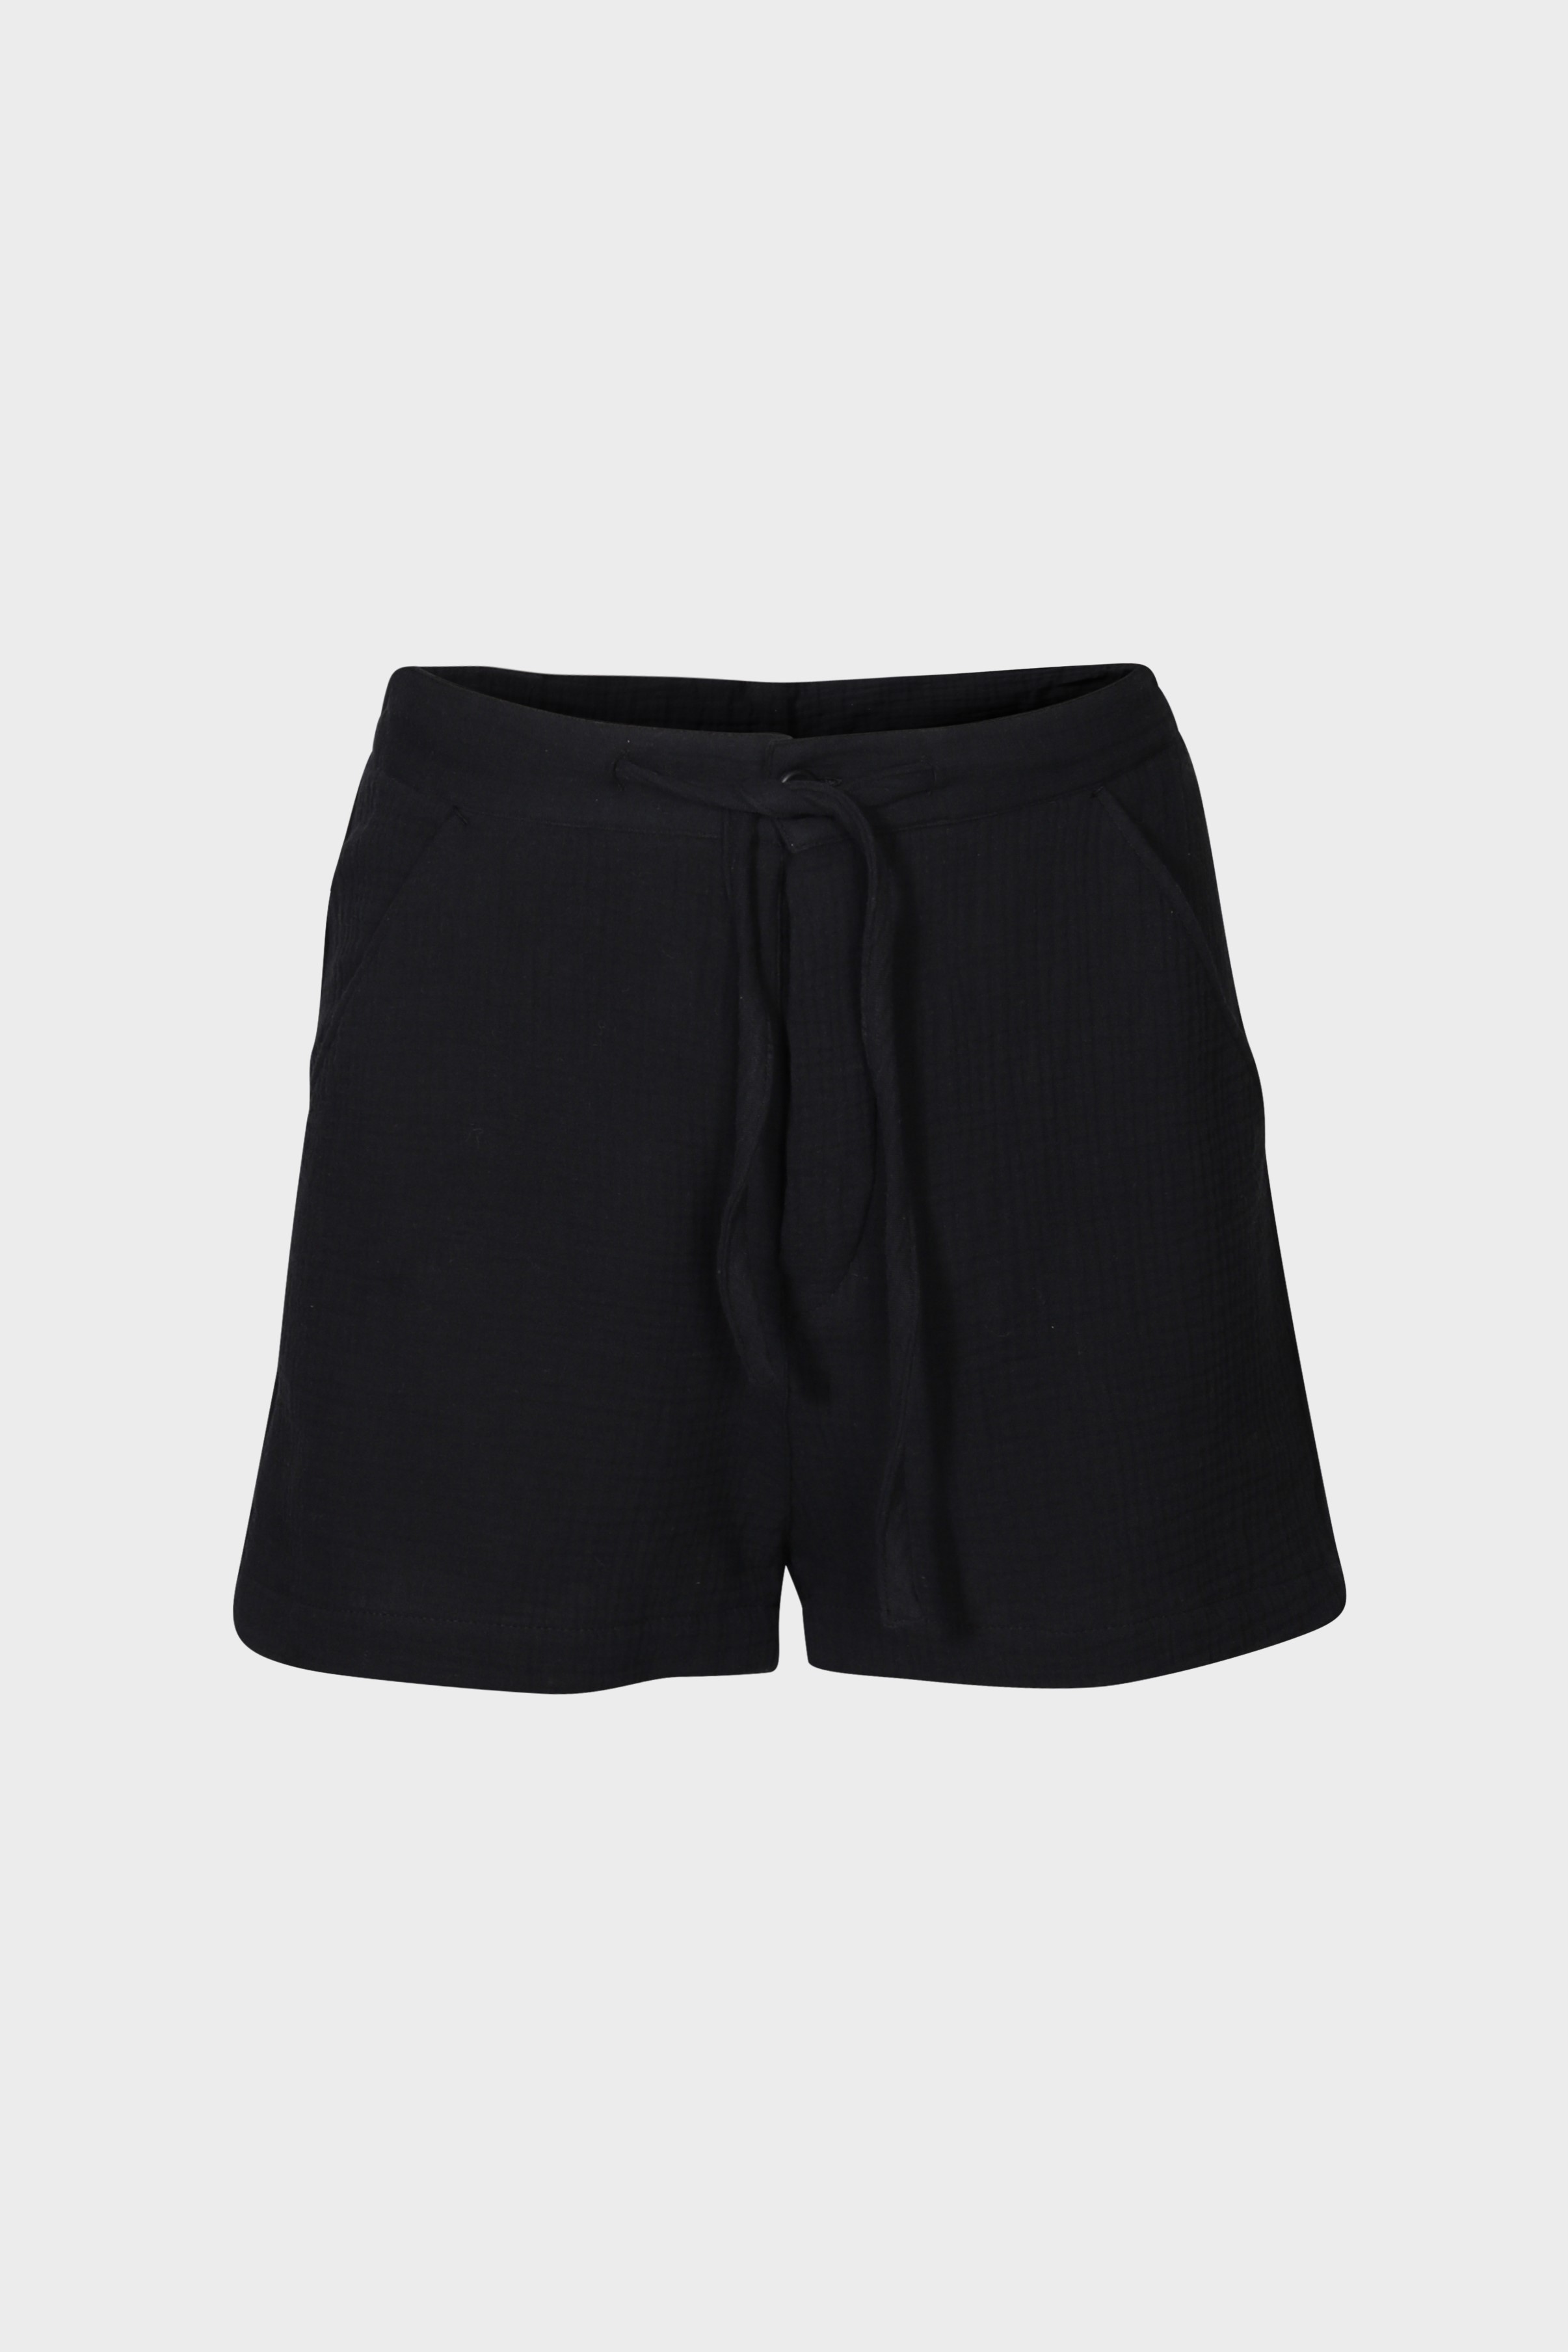 HANNES ROETHER Mousseline Shorts in Black M